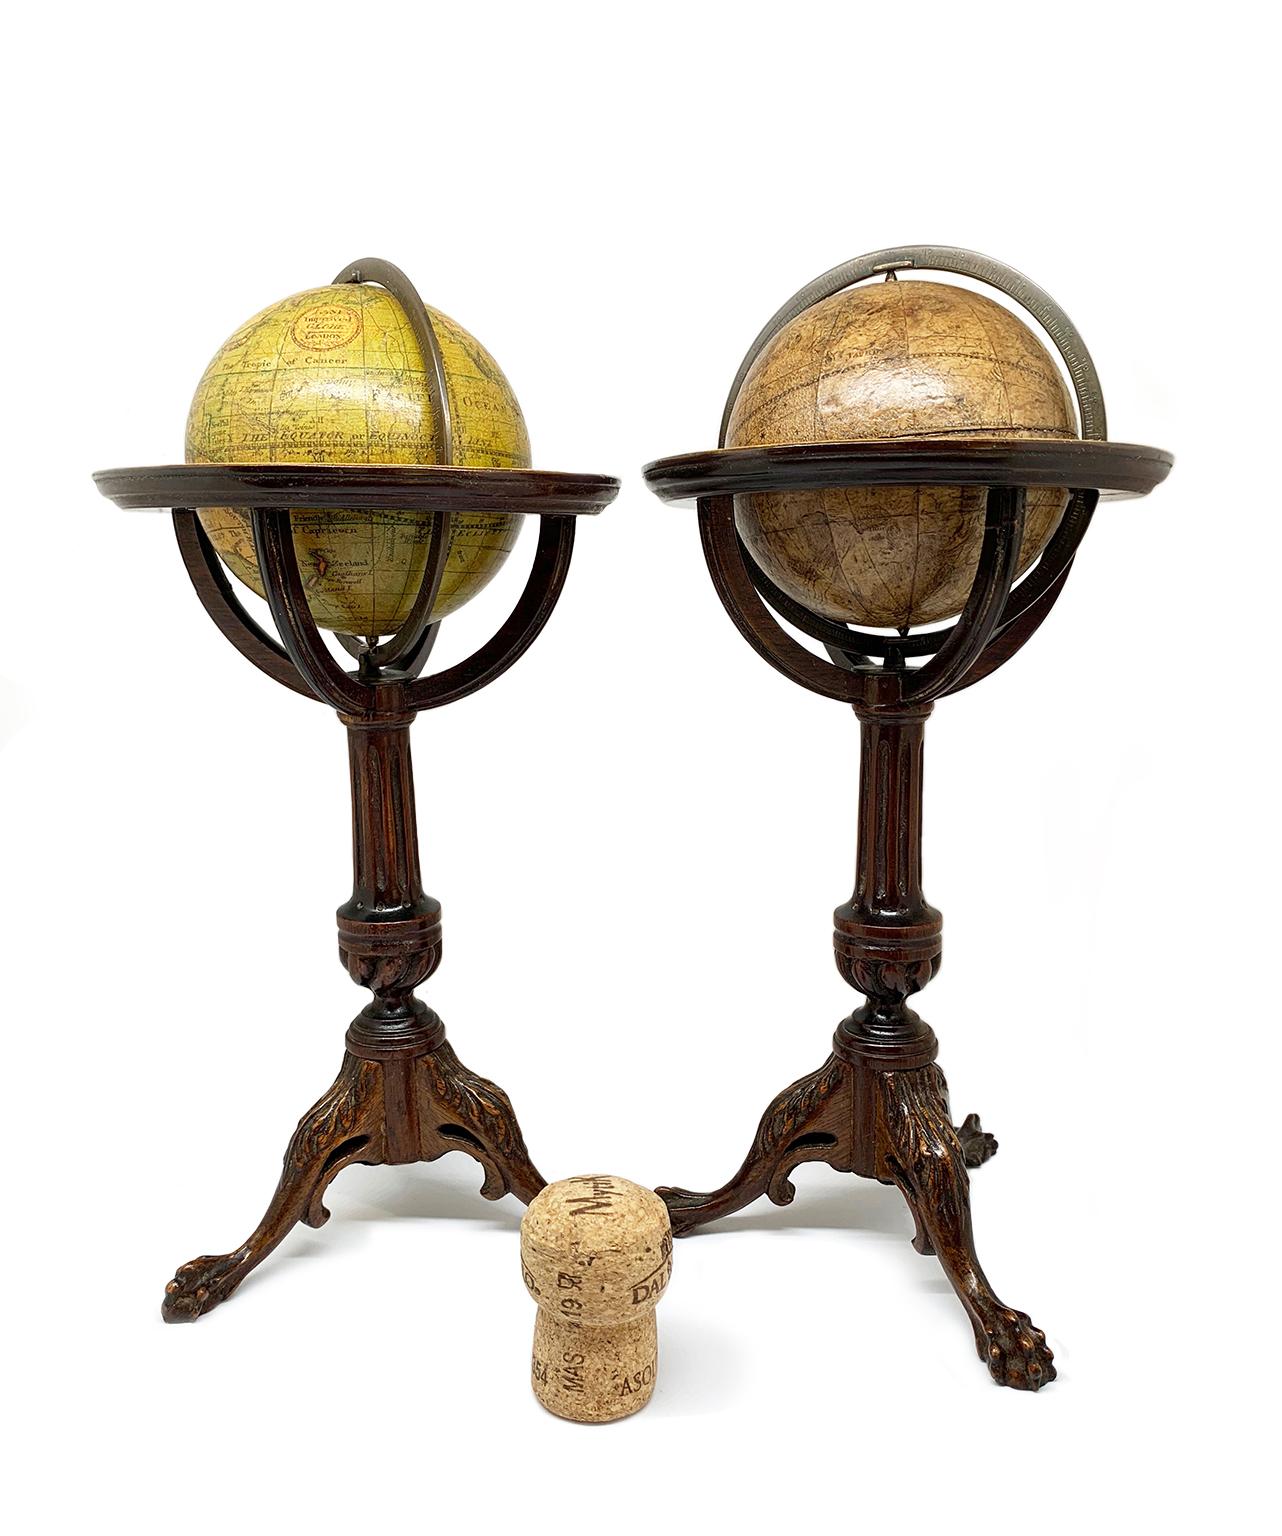 Pair of miniature globes
Lane’s, London, post 1833, ante 1858
Papier-mâché, wood and paper

They measure:
Height 9.44 in (24 cm);
Sphere diameter 2.75 in (7 cm);
Diameter of the wooden base 4.17 in (10.6 cm).
Weight 0.73 lb (335 g)

State